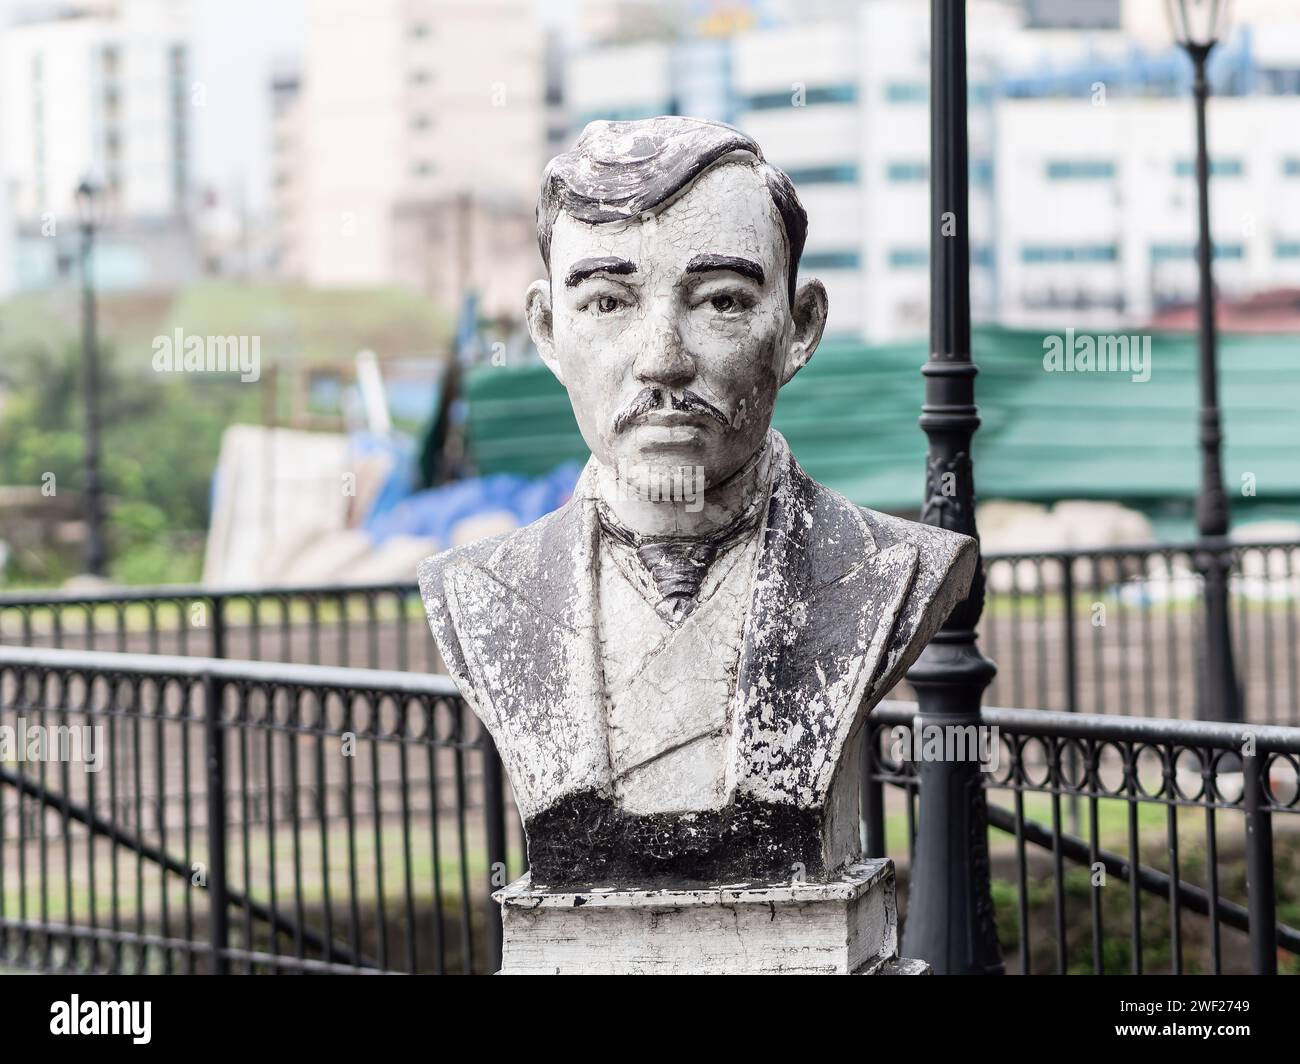 Bust of Jose Rizal, the Filipino nationalist and freedom fighter, at Fort Santiago, Intramuros, Manila, Philippines Stock Photo